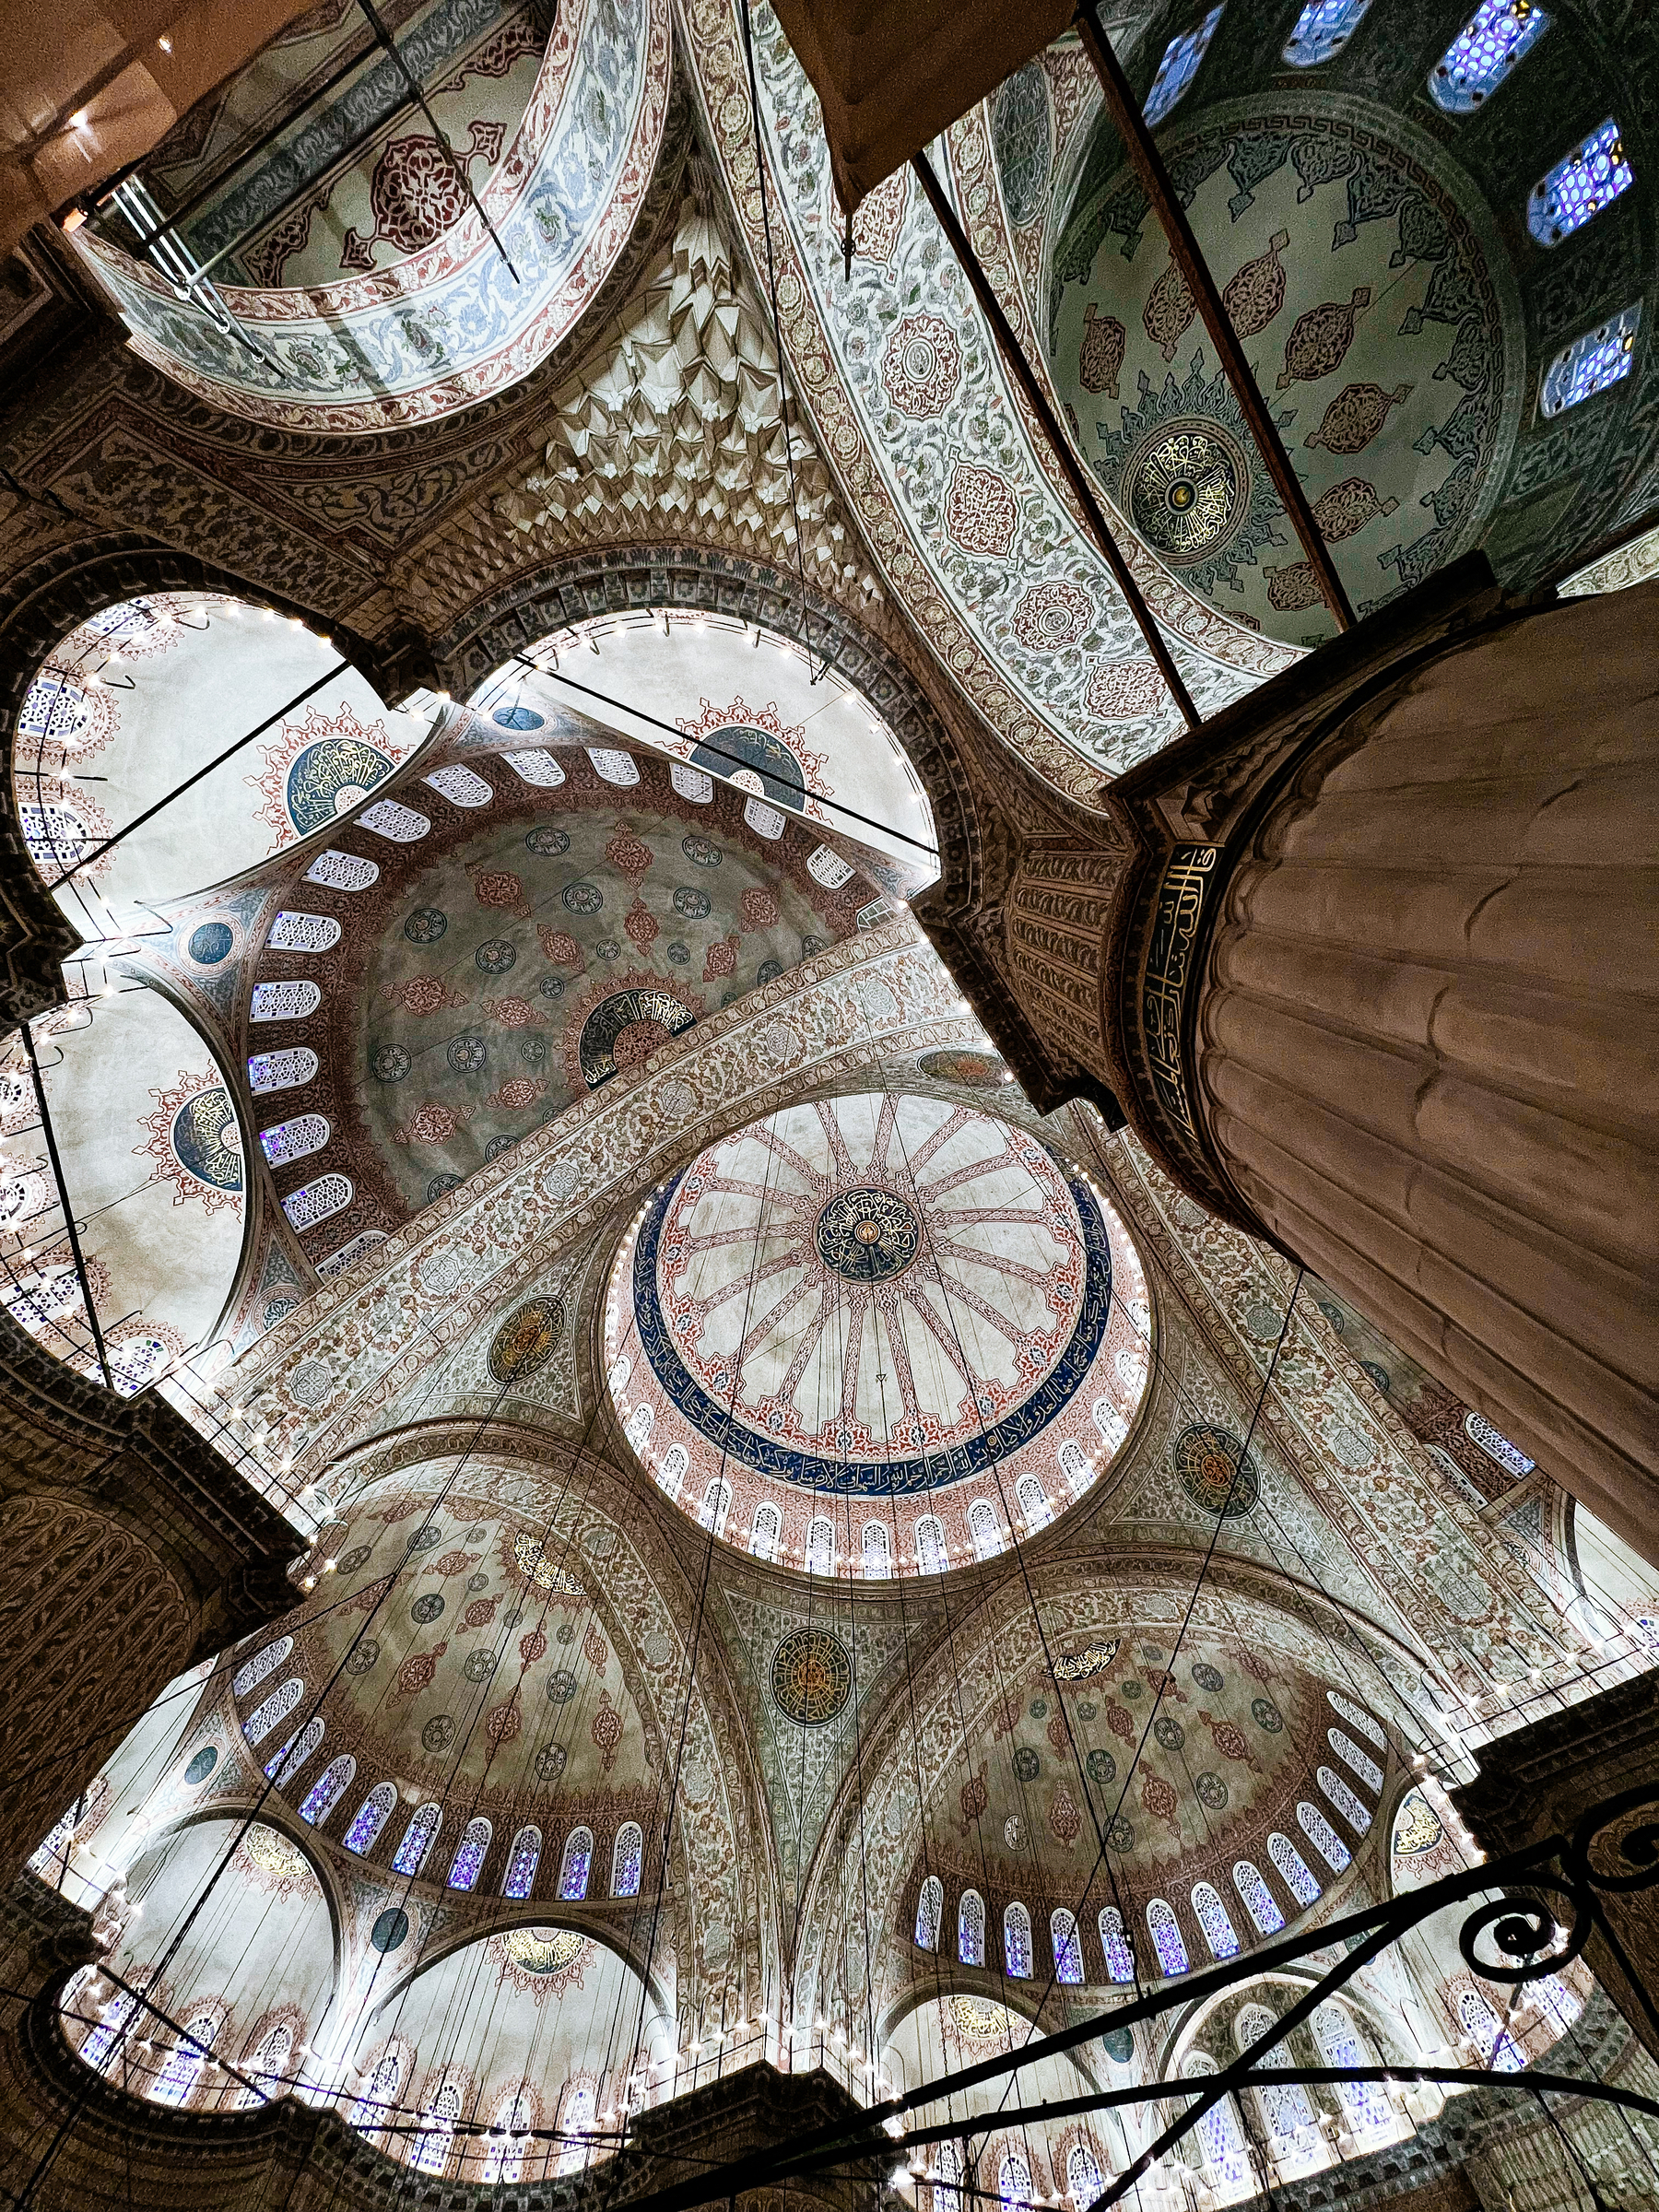 Looking up into the ceiling of the Blue Mosque. 